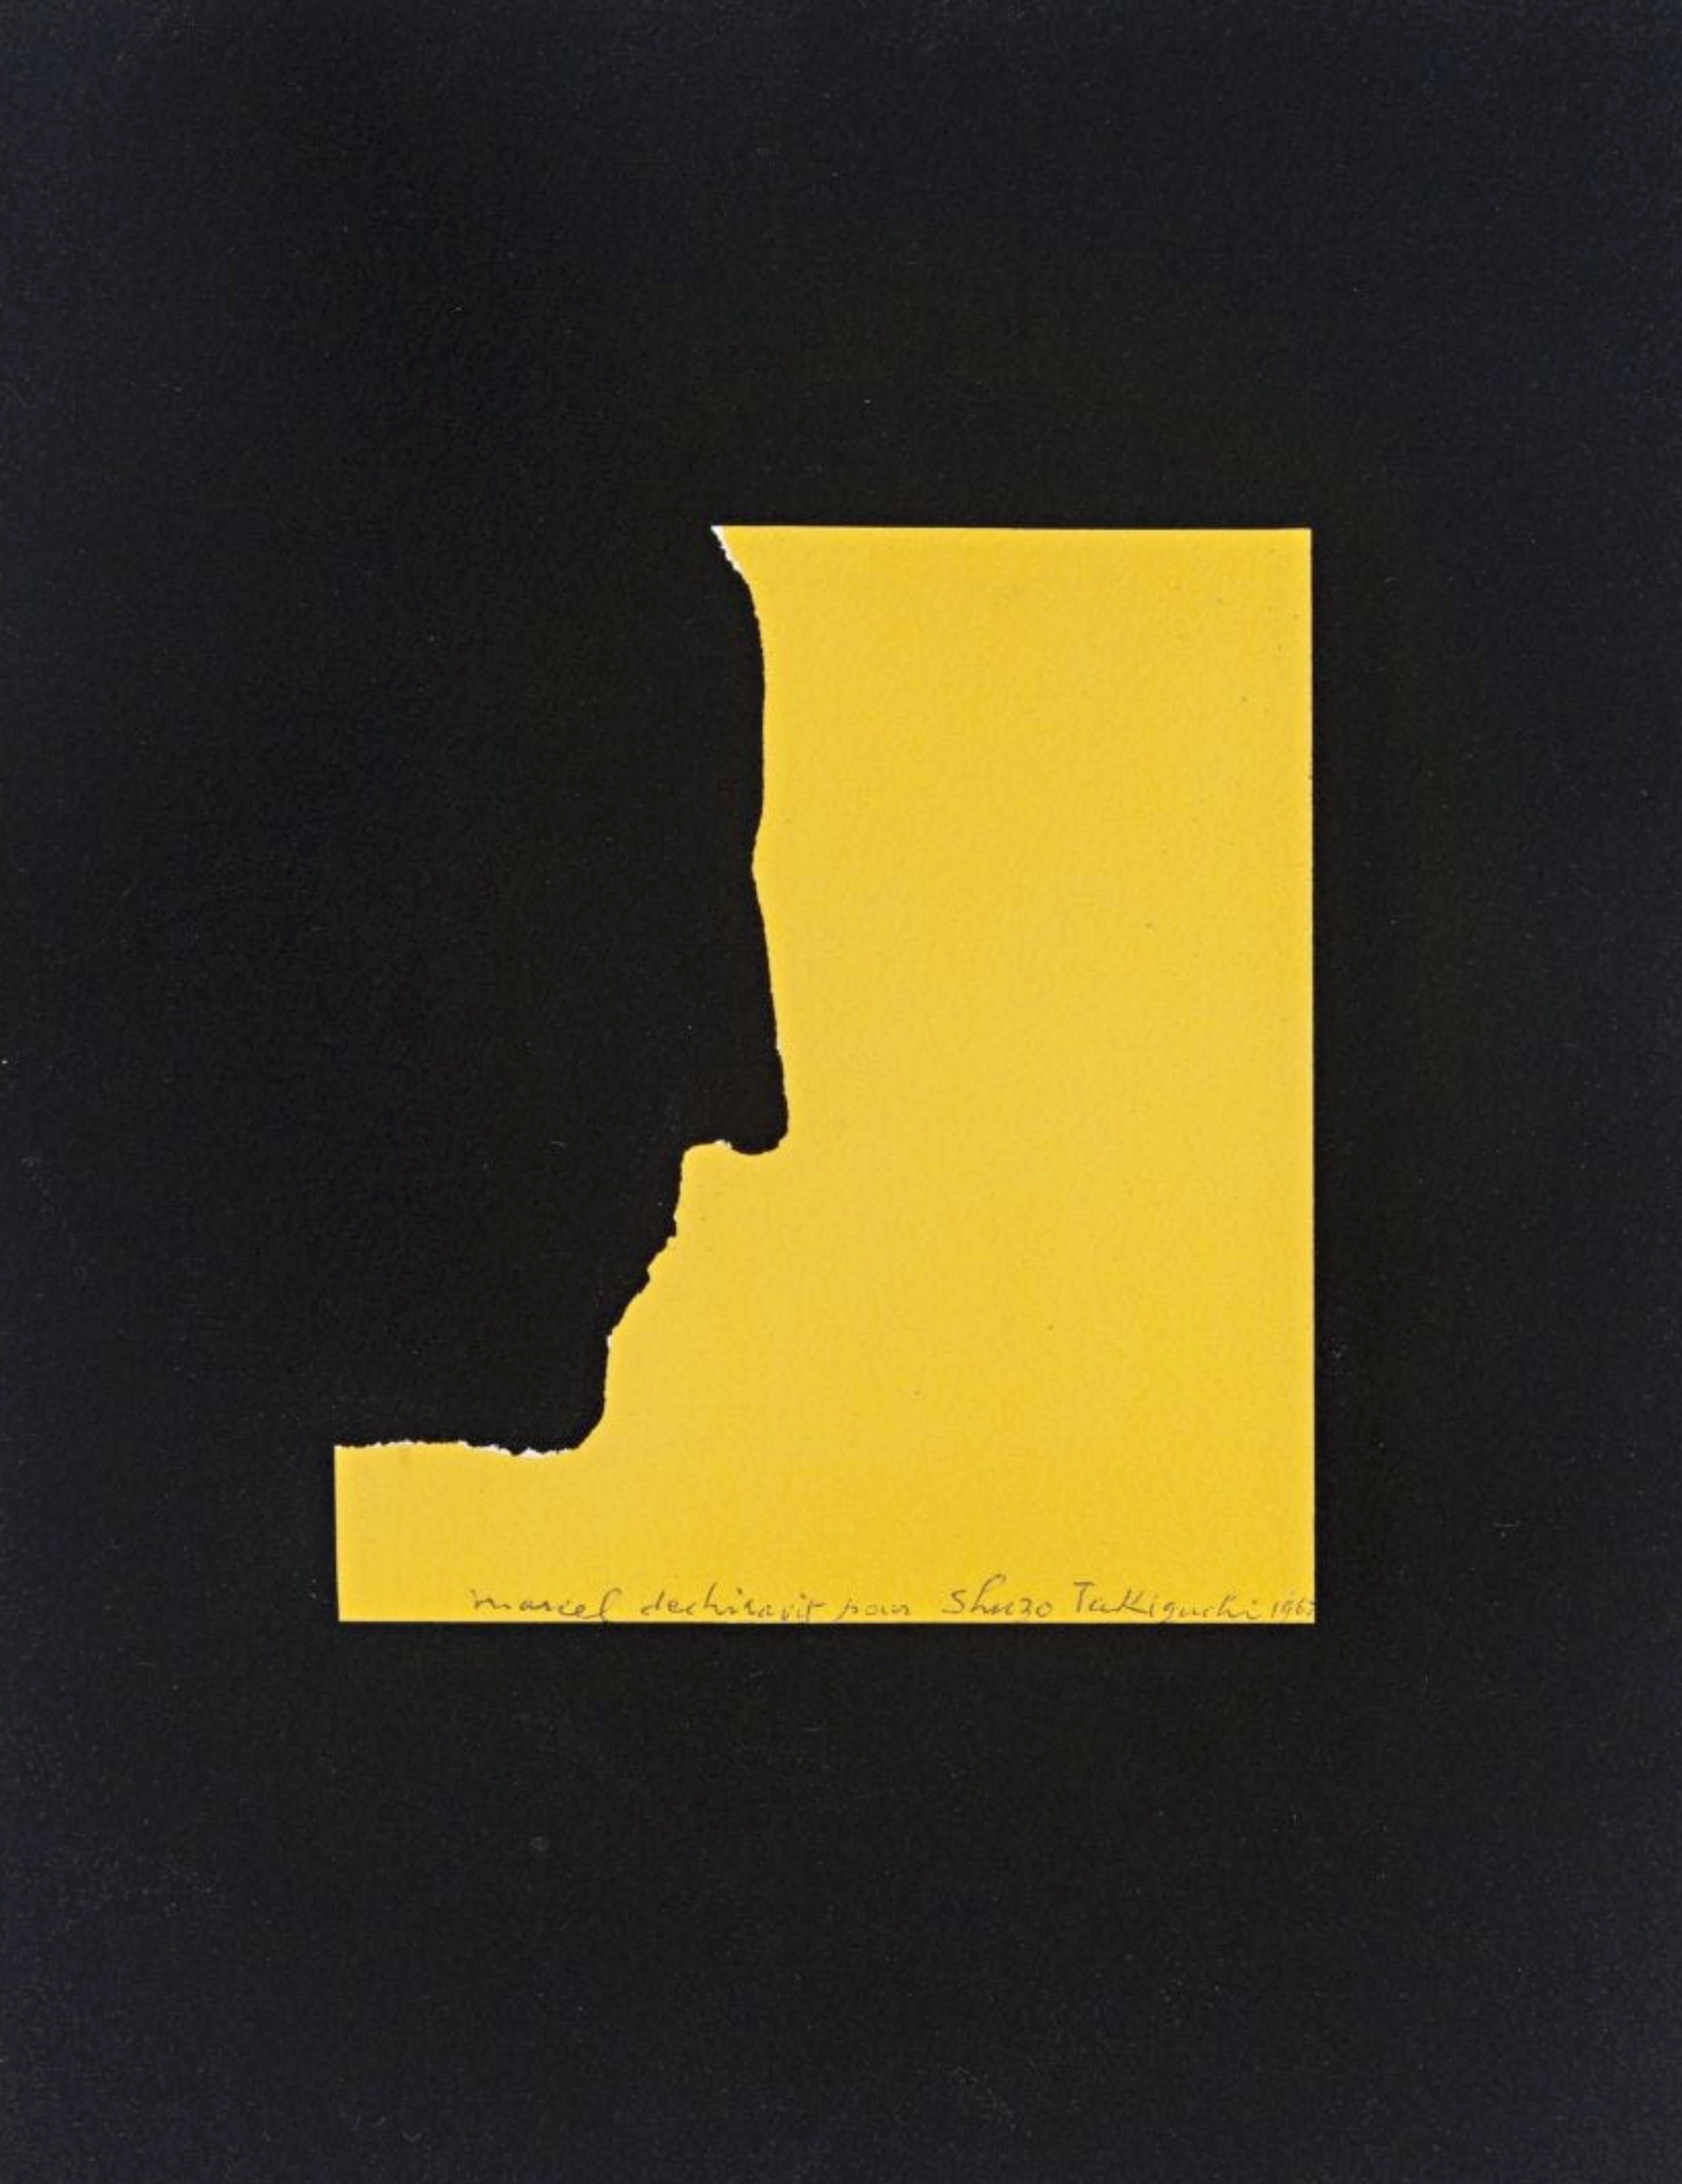 Marcel Duchamp Portrait Print - Self Portrait in Profile (Schwarz 344) from To and From Rrose Selavy (Duchamp)